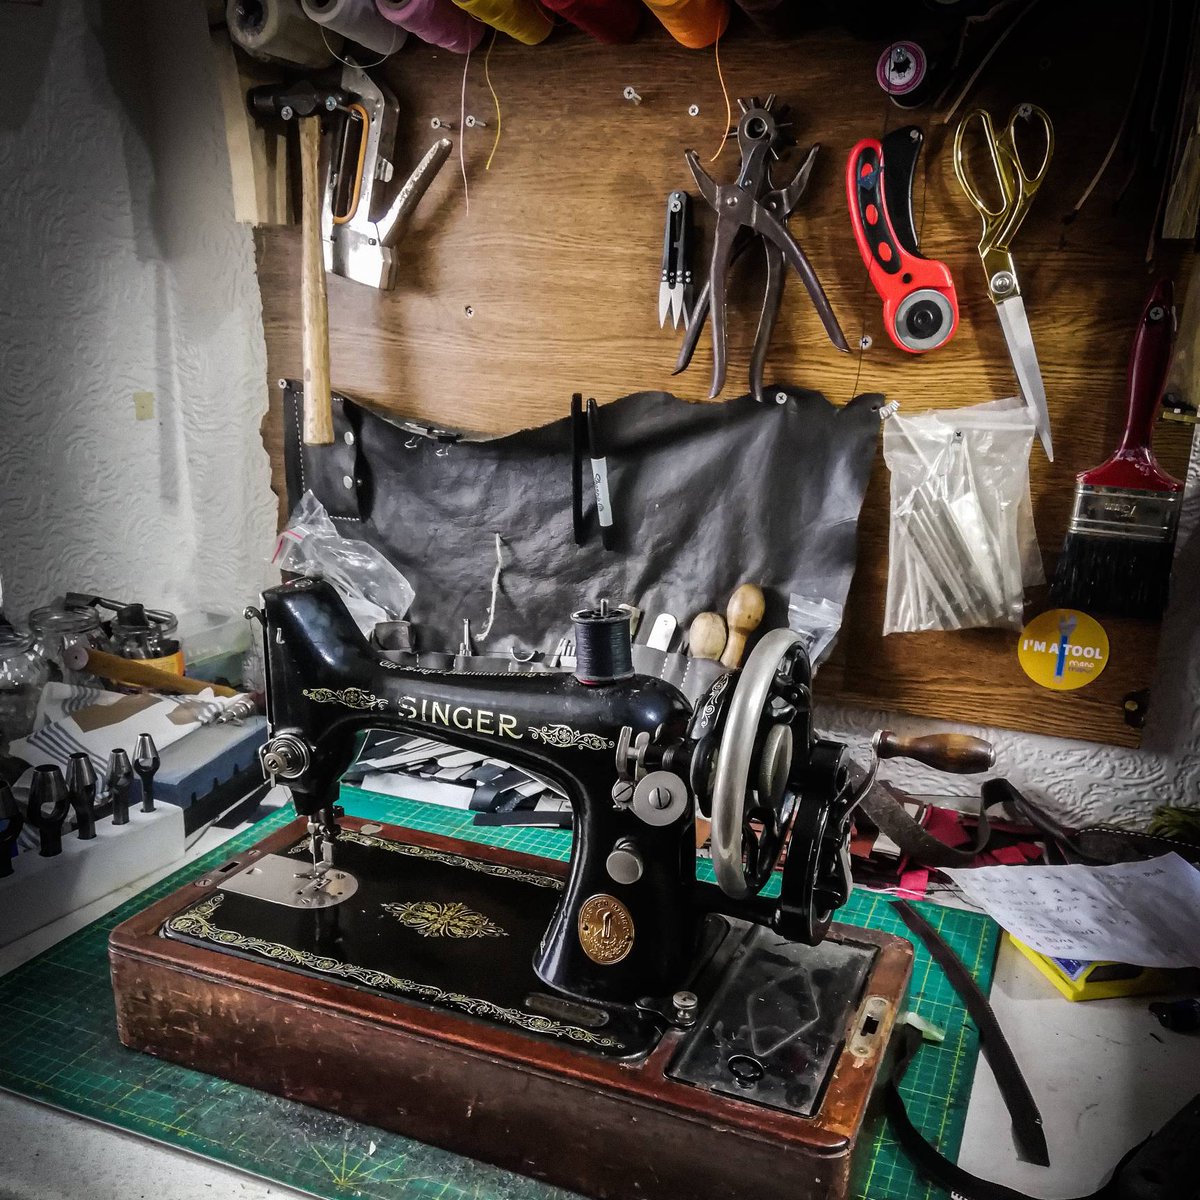 Cracking out the old singer sowing machine for some bag linings. Not often I get to use the machine, 
.
.
#sowingmachine #antique #singer #sowing #leatherwork #bag #workbench